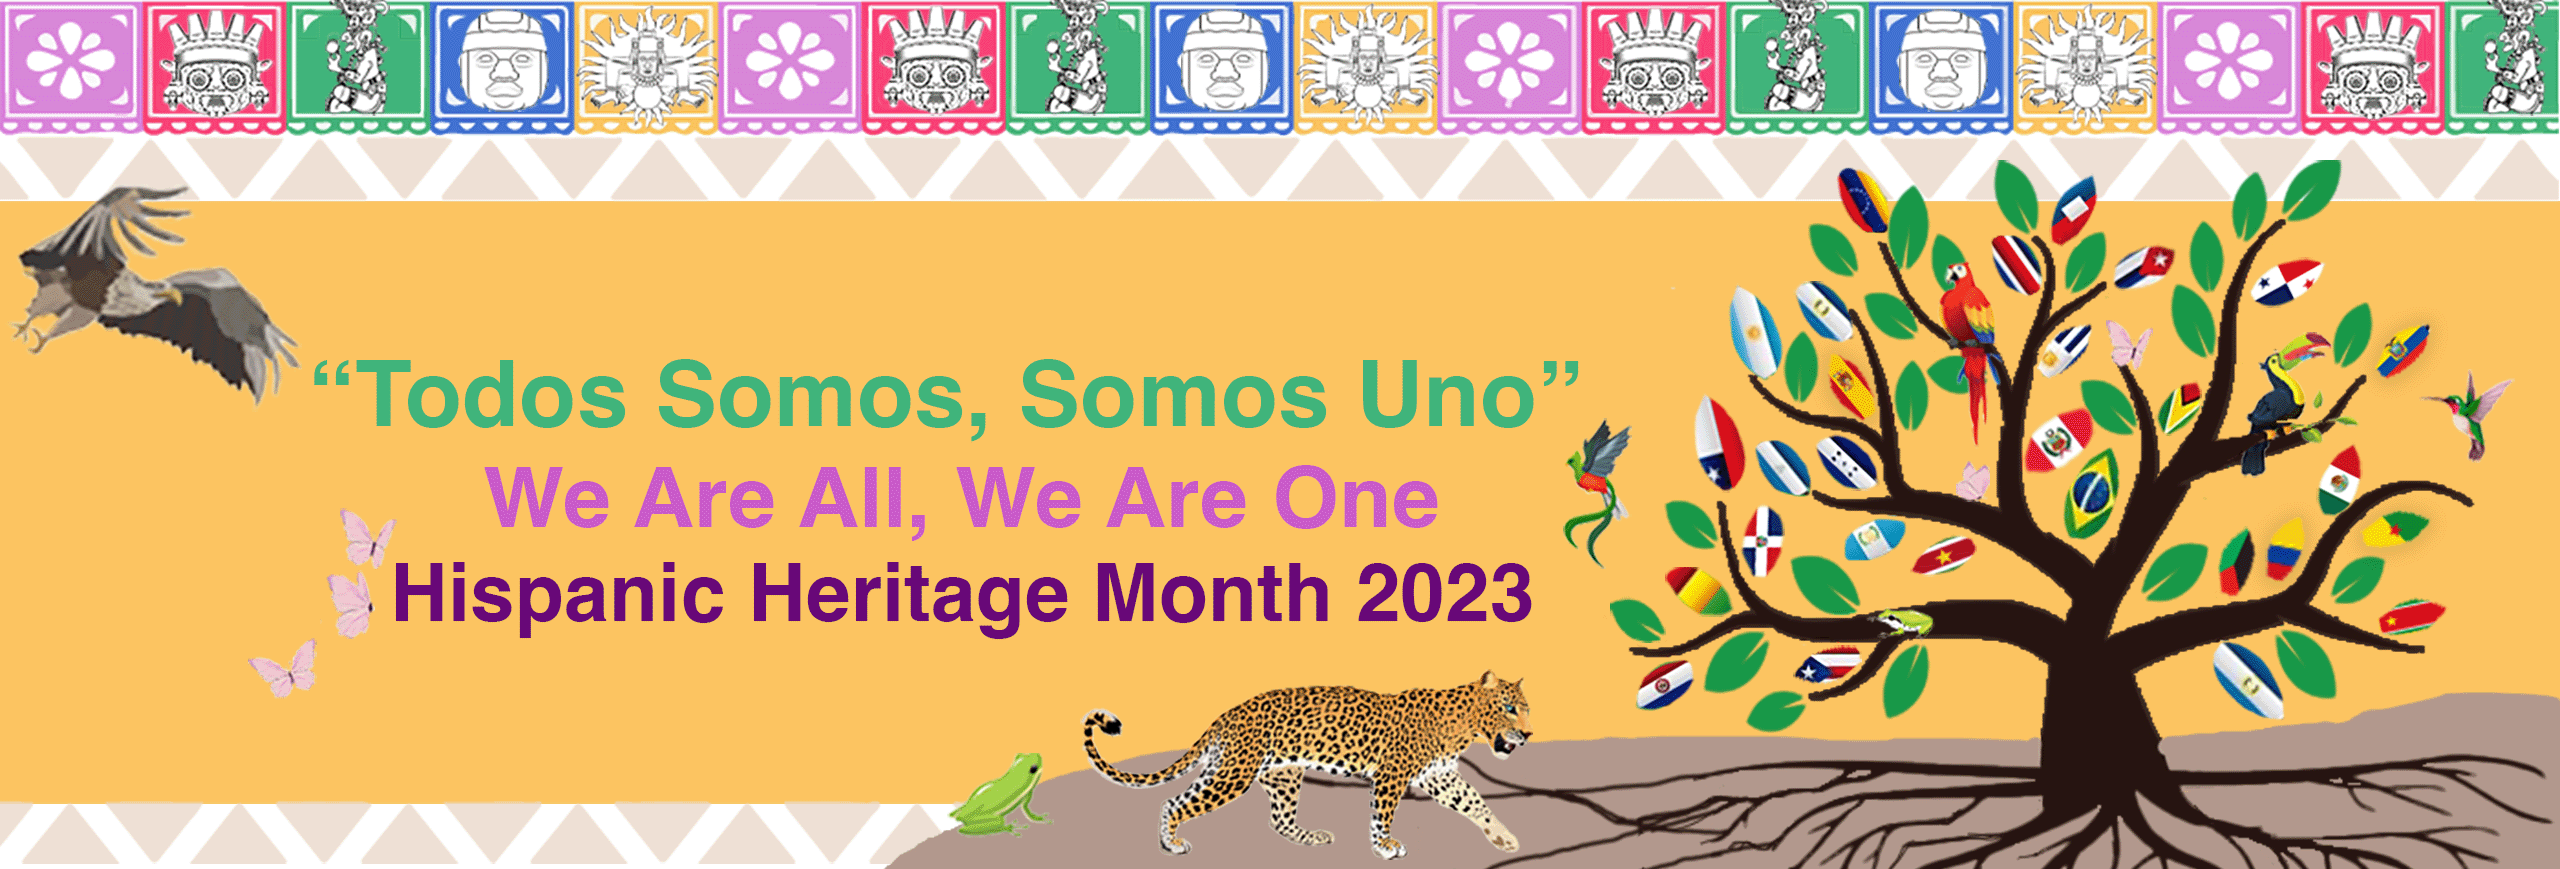 The 2023 Hispanic Heritage Month collage- featuring symbols, animals, and flags from 28 countries linked to the Hispanic/Latin American diaspora displayed as leaves on a tree to honor the diverse roots of the Hispanic/Latino community.